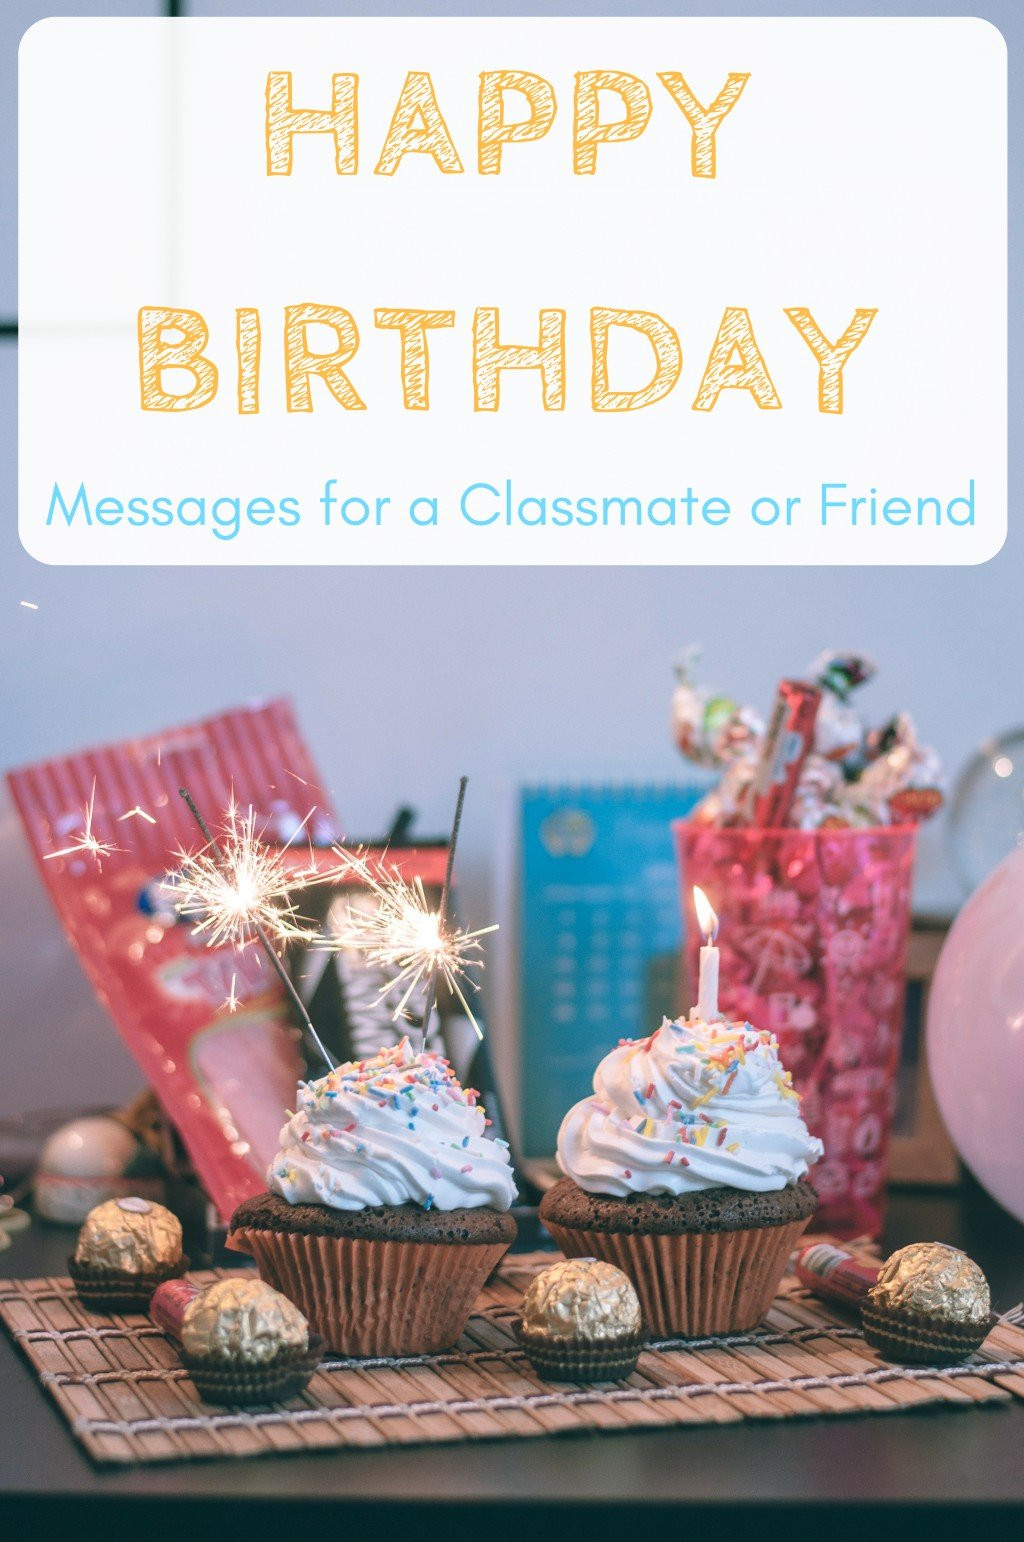 Friends Birthday Wishes
 Happy Birthday Wishes for a Classmate School Friend or